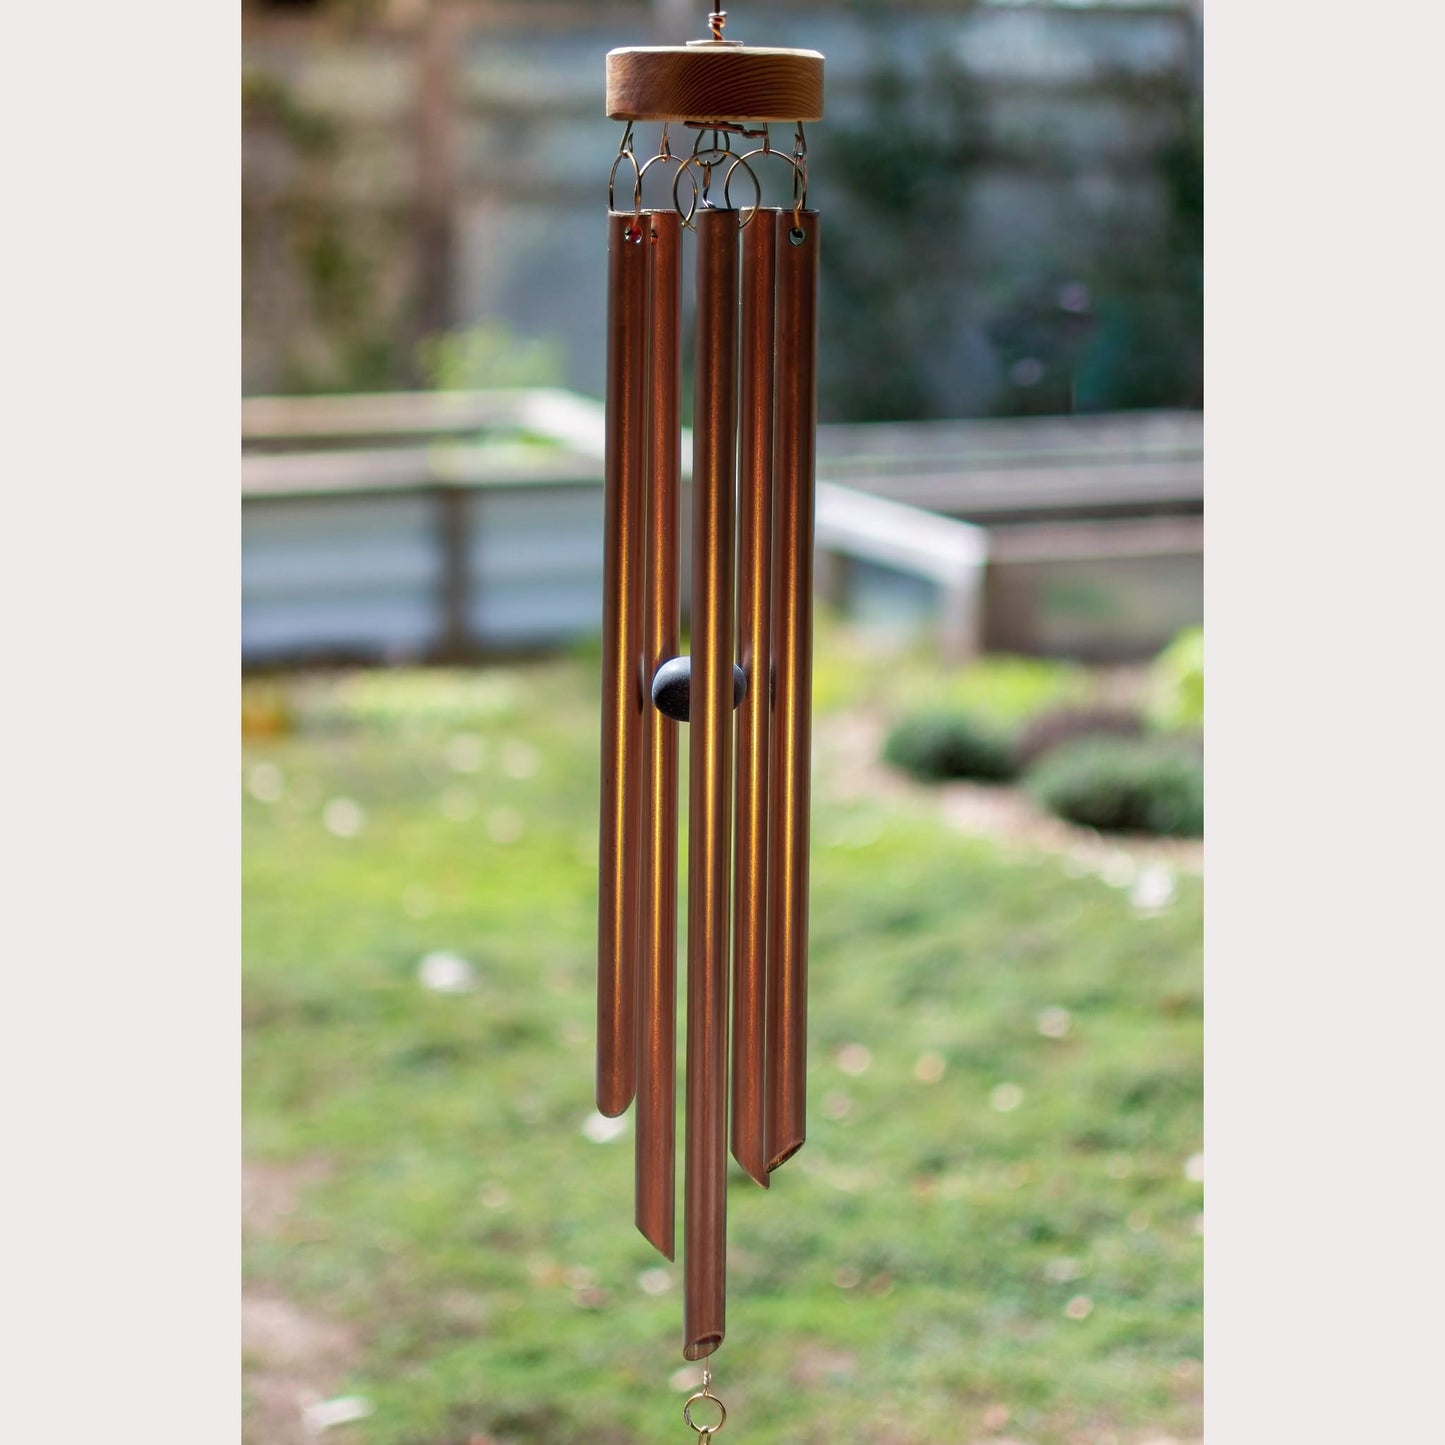 five copper chime by Coast Chimes